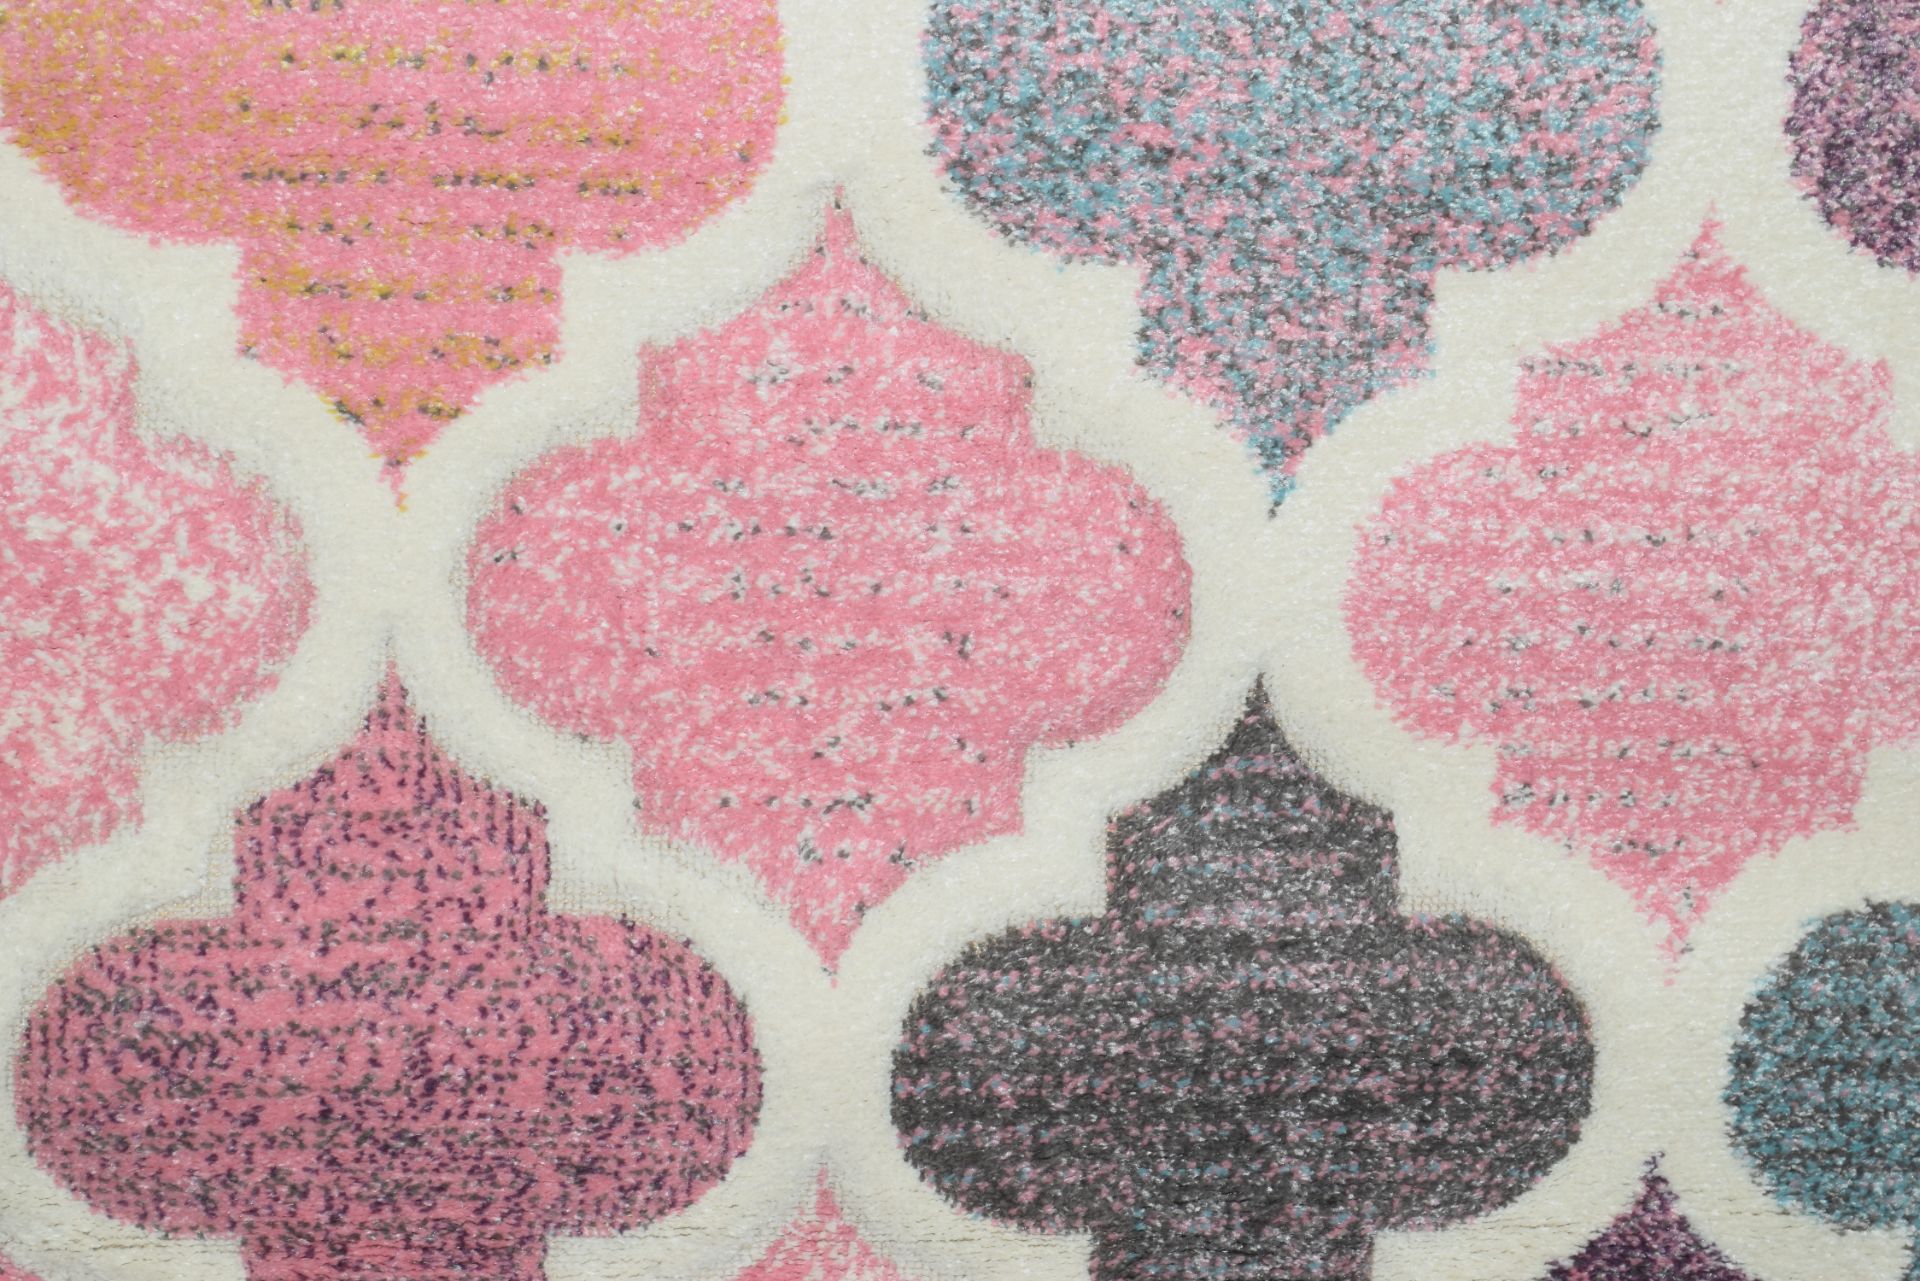 Macclesfield pink rug, 120 x 170cm - Image 2 of 2